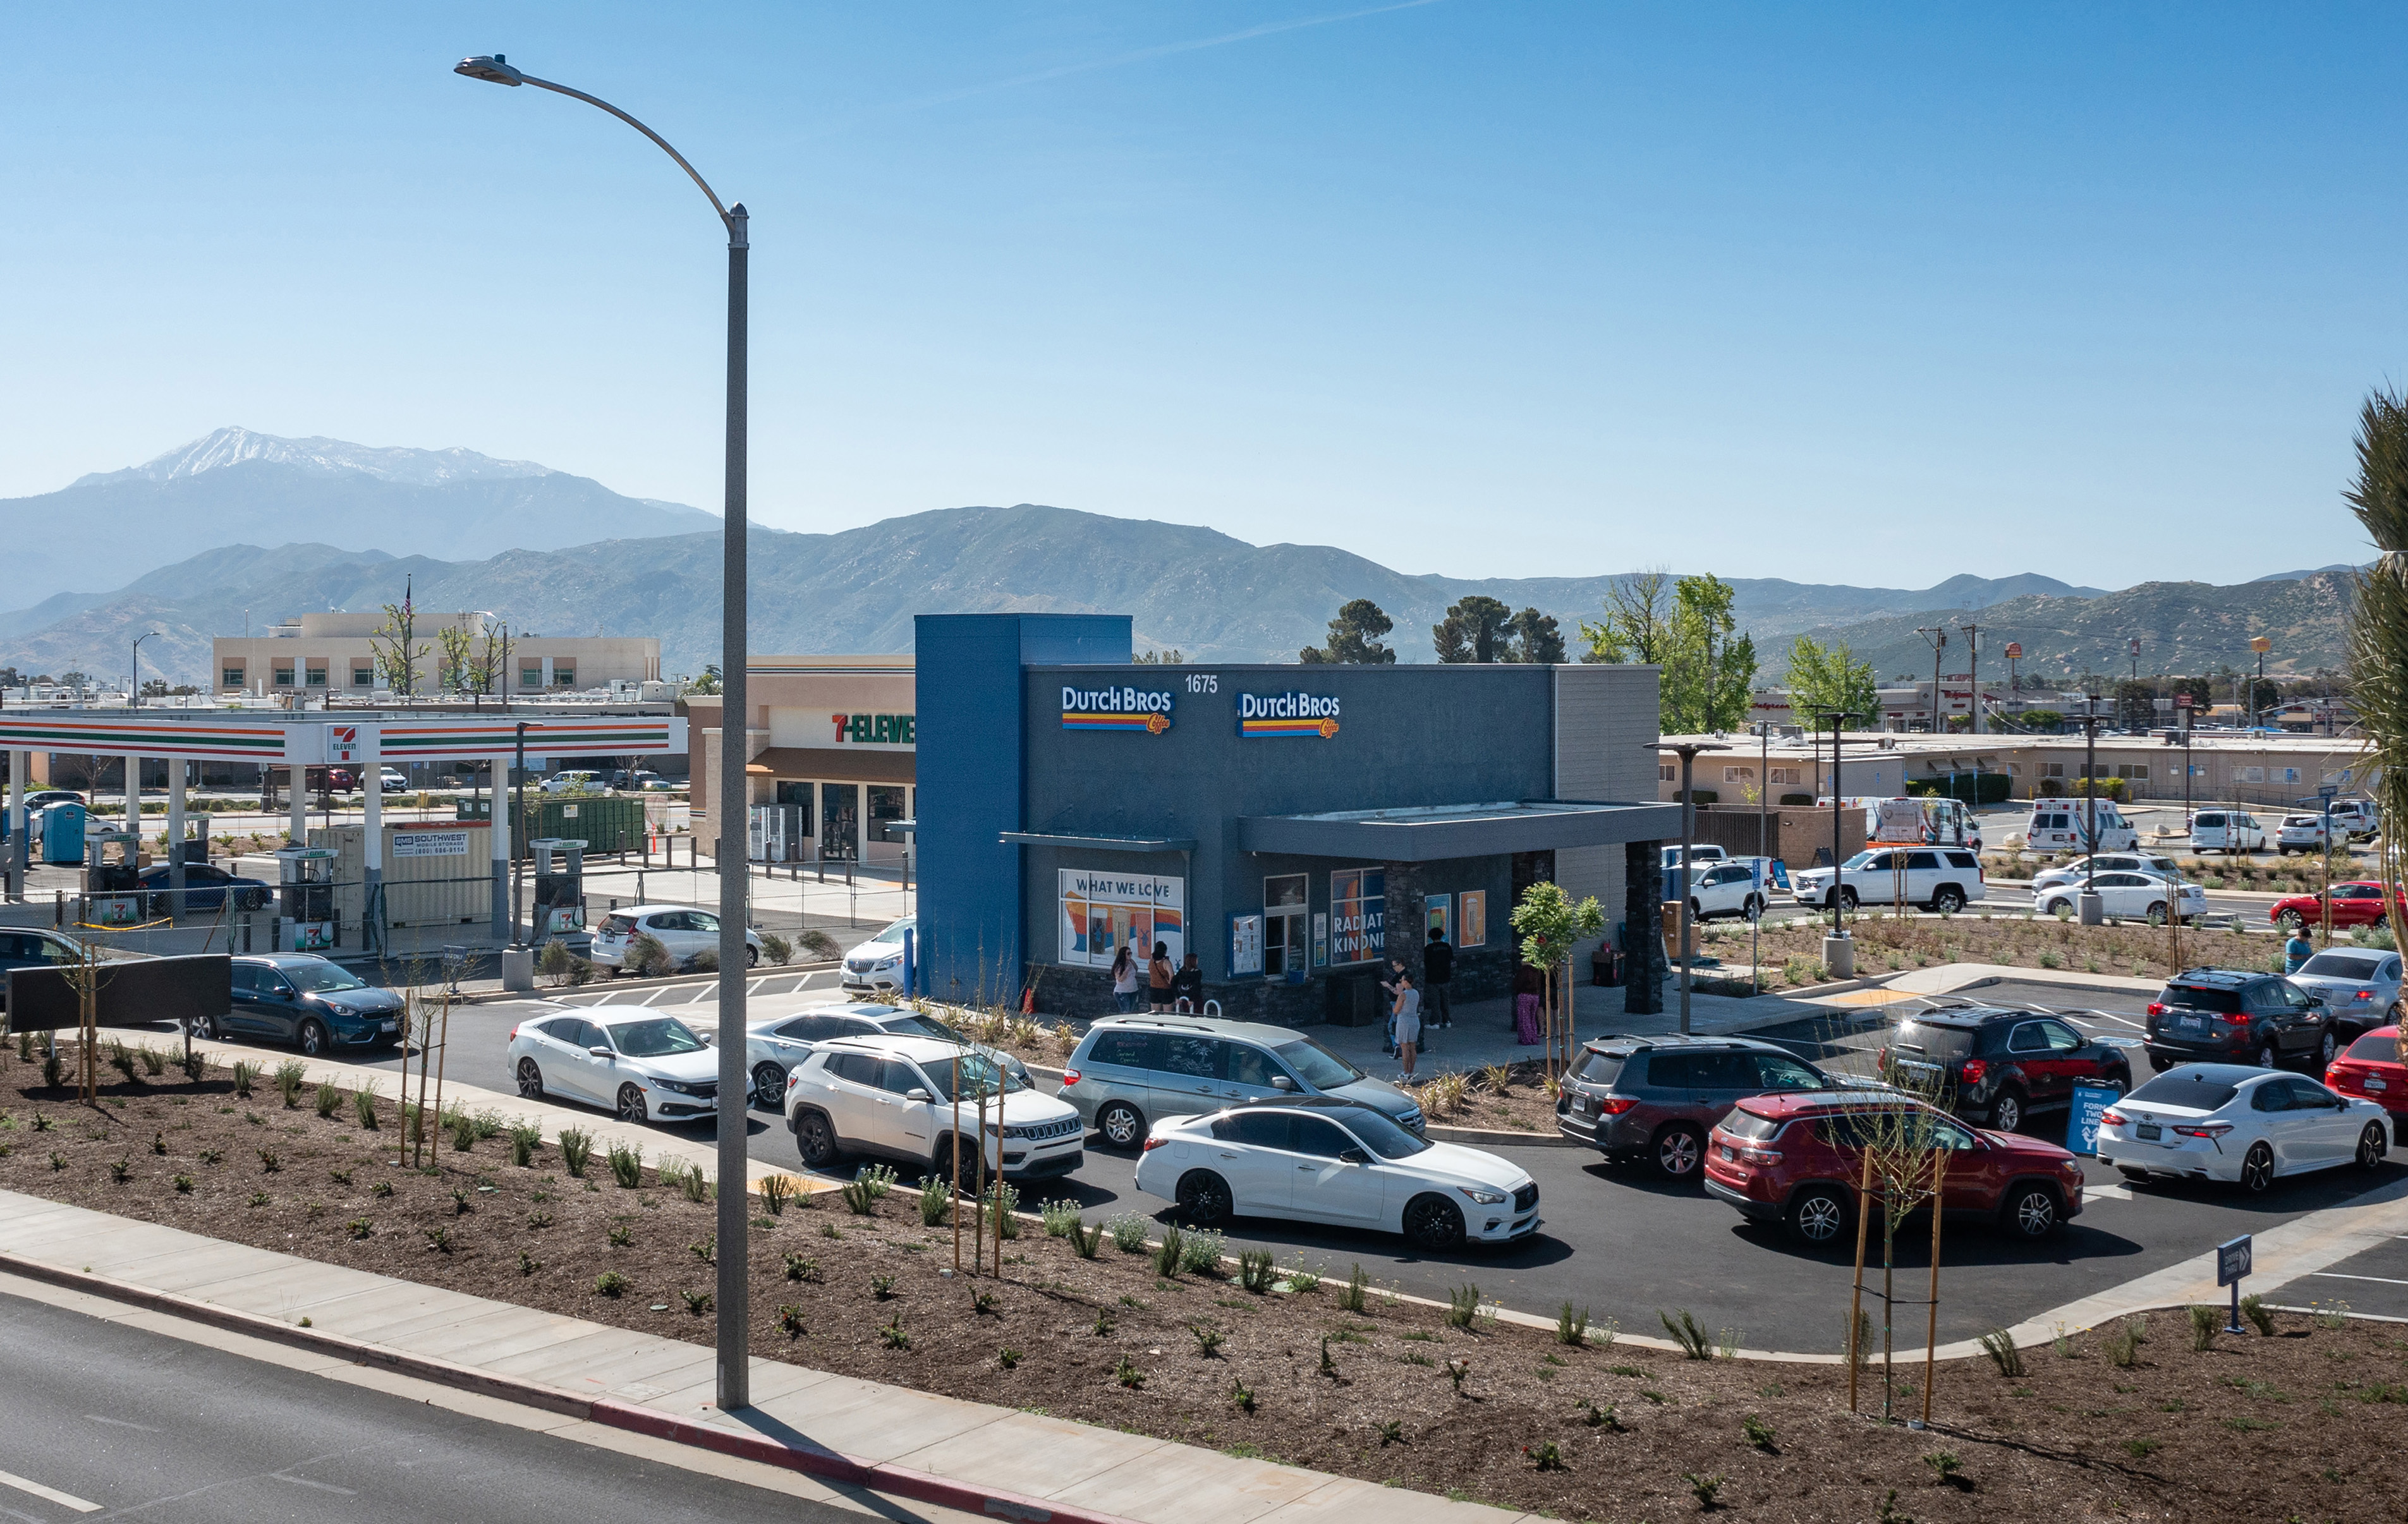 Hanley Investment Group Arranges Pre-Sale of New Dutch Bros Coffee Drive-Thru in Riverside County, Calif., for $1.9 Million